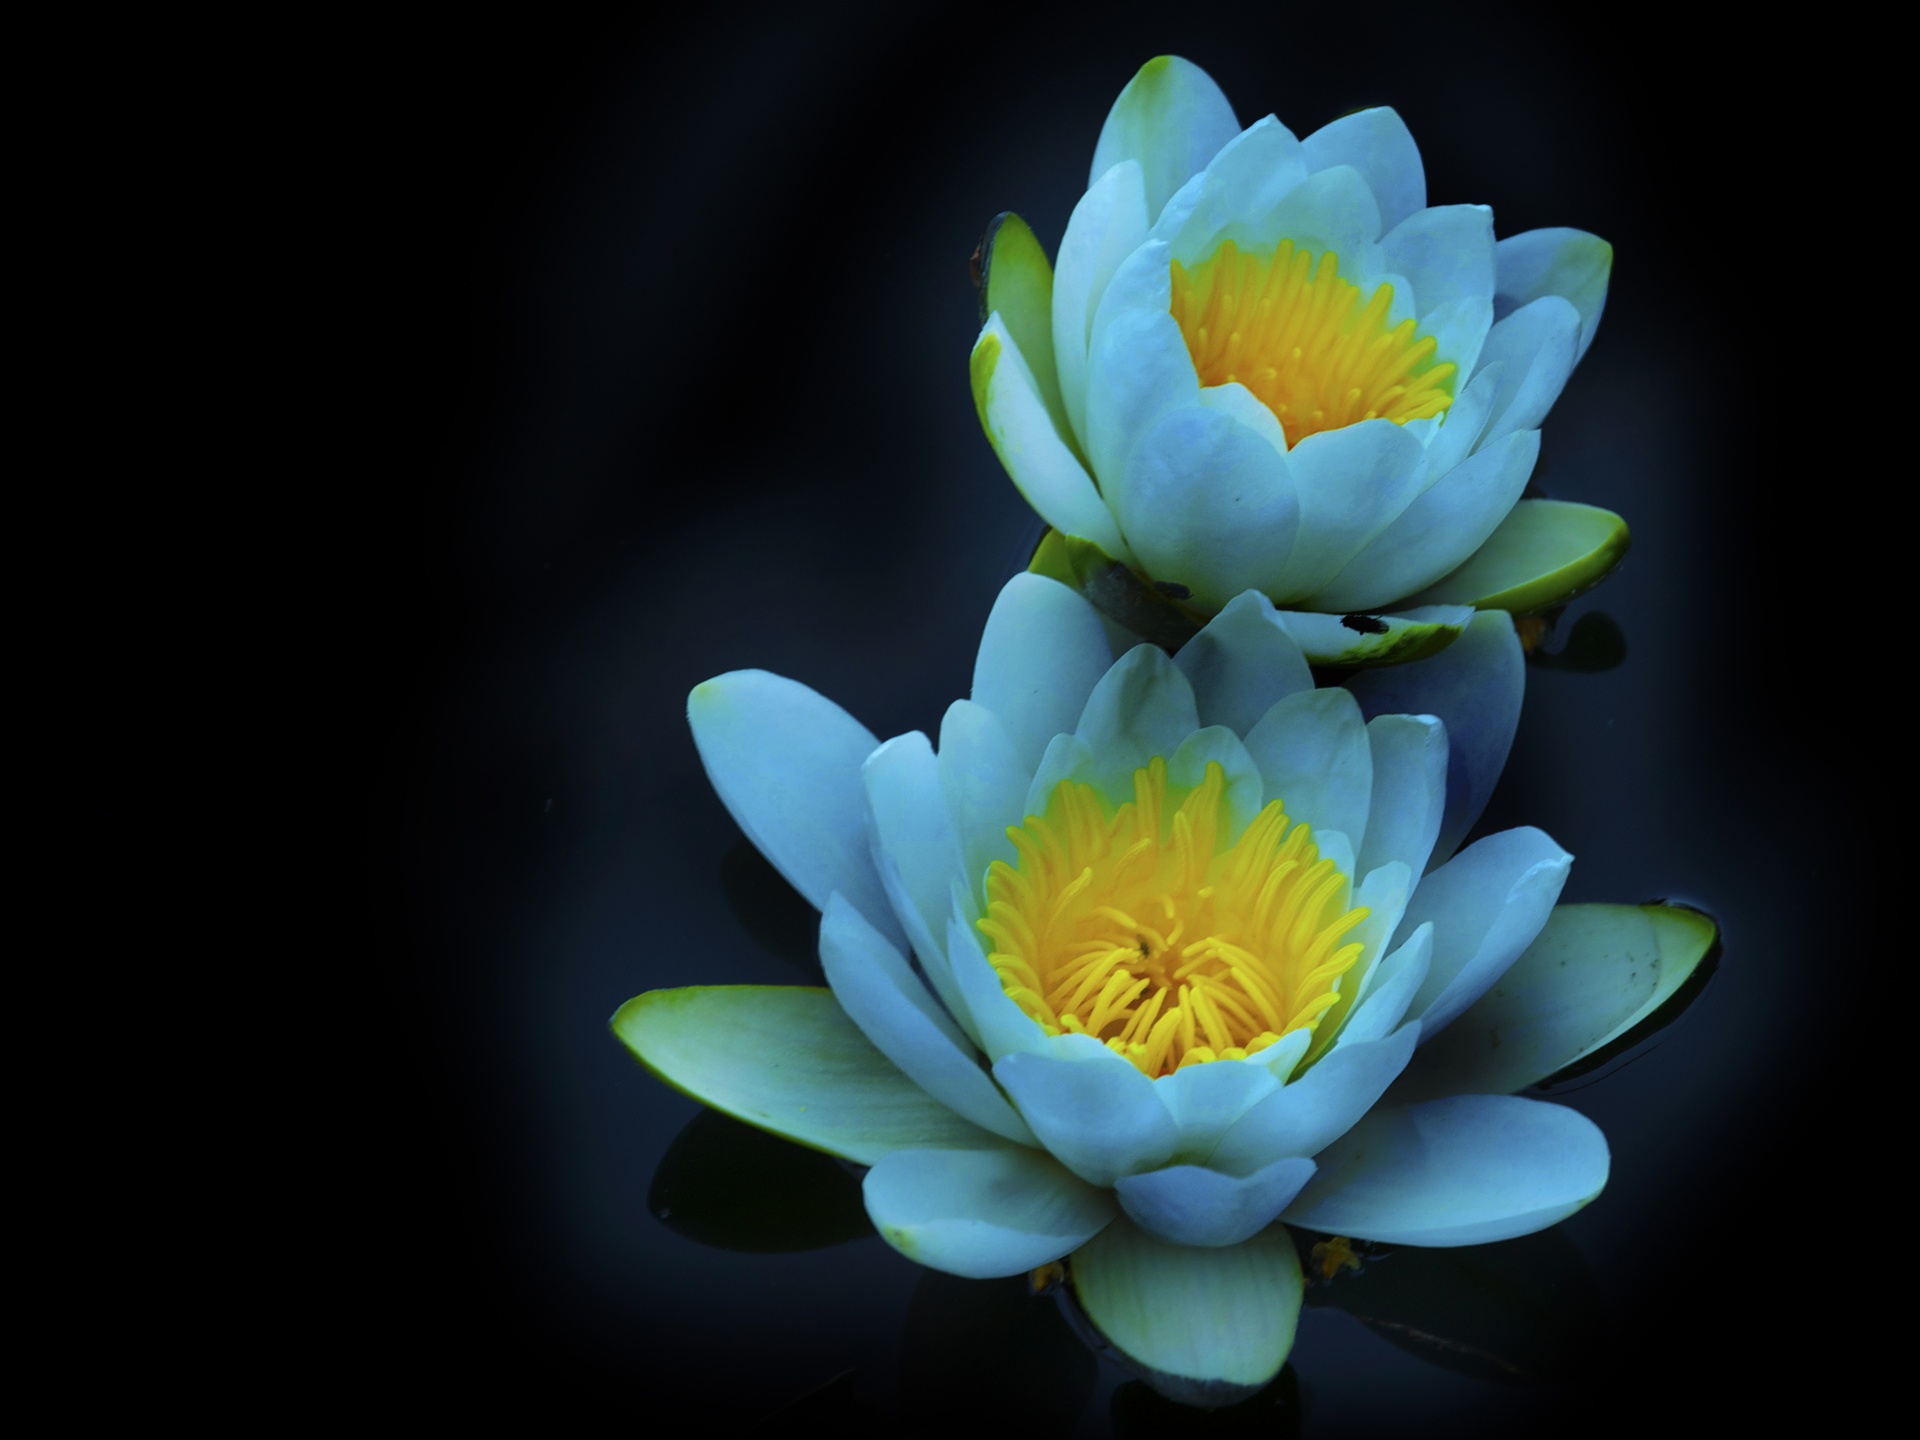 water lily 1920x1440 wallpaper download page 319016